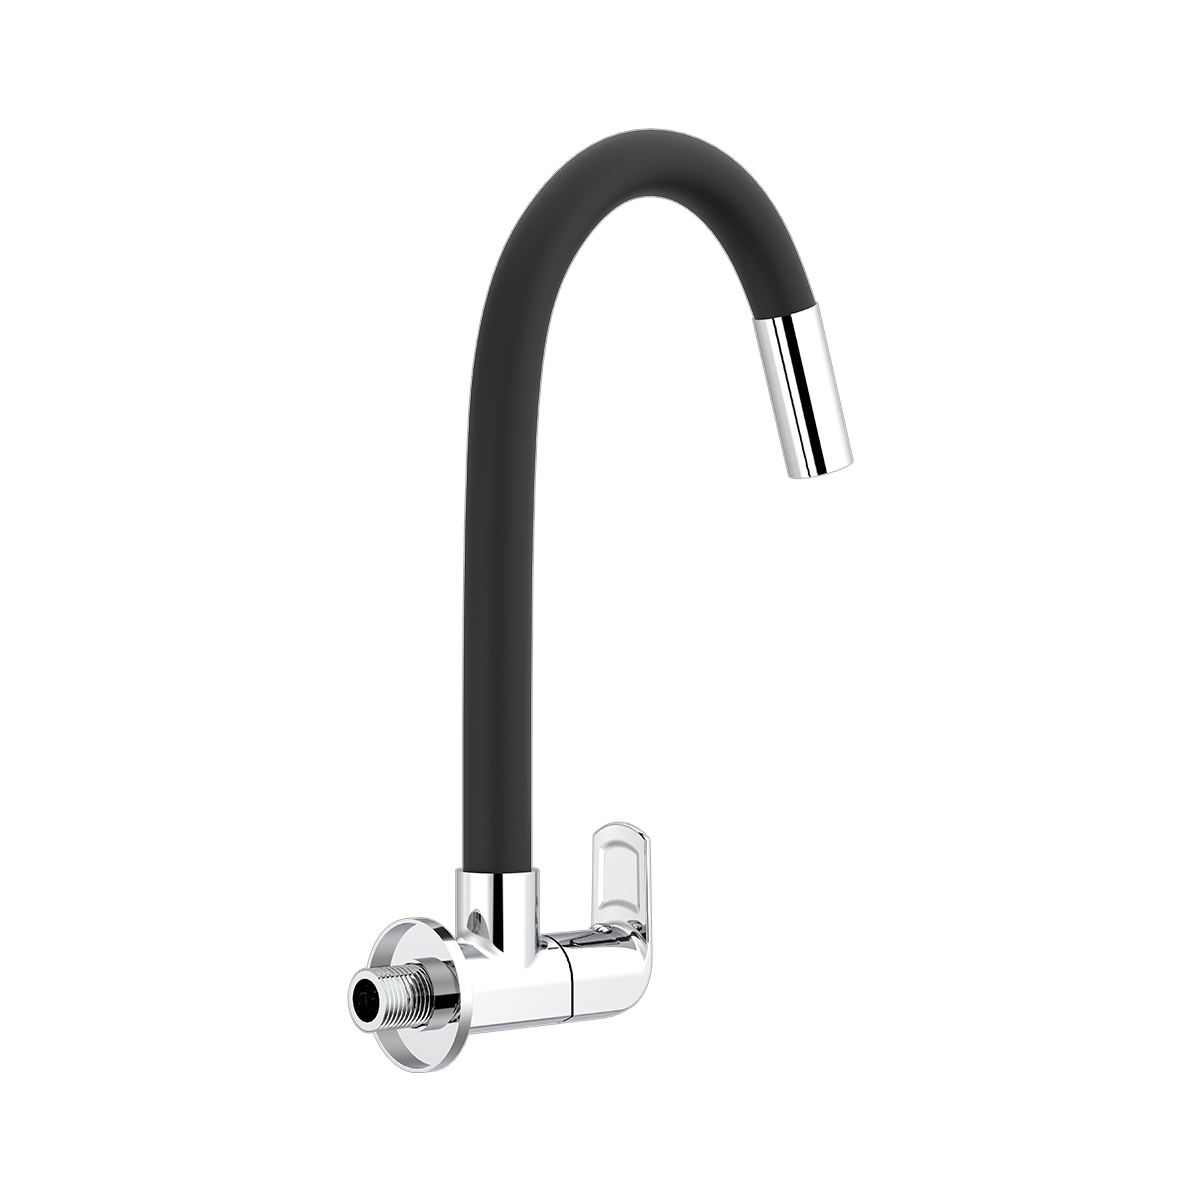 Wall Mounted Sink Cock With Swivel Flexible Spout